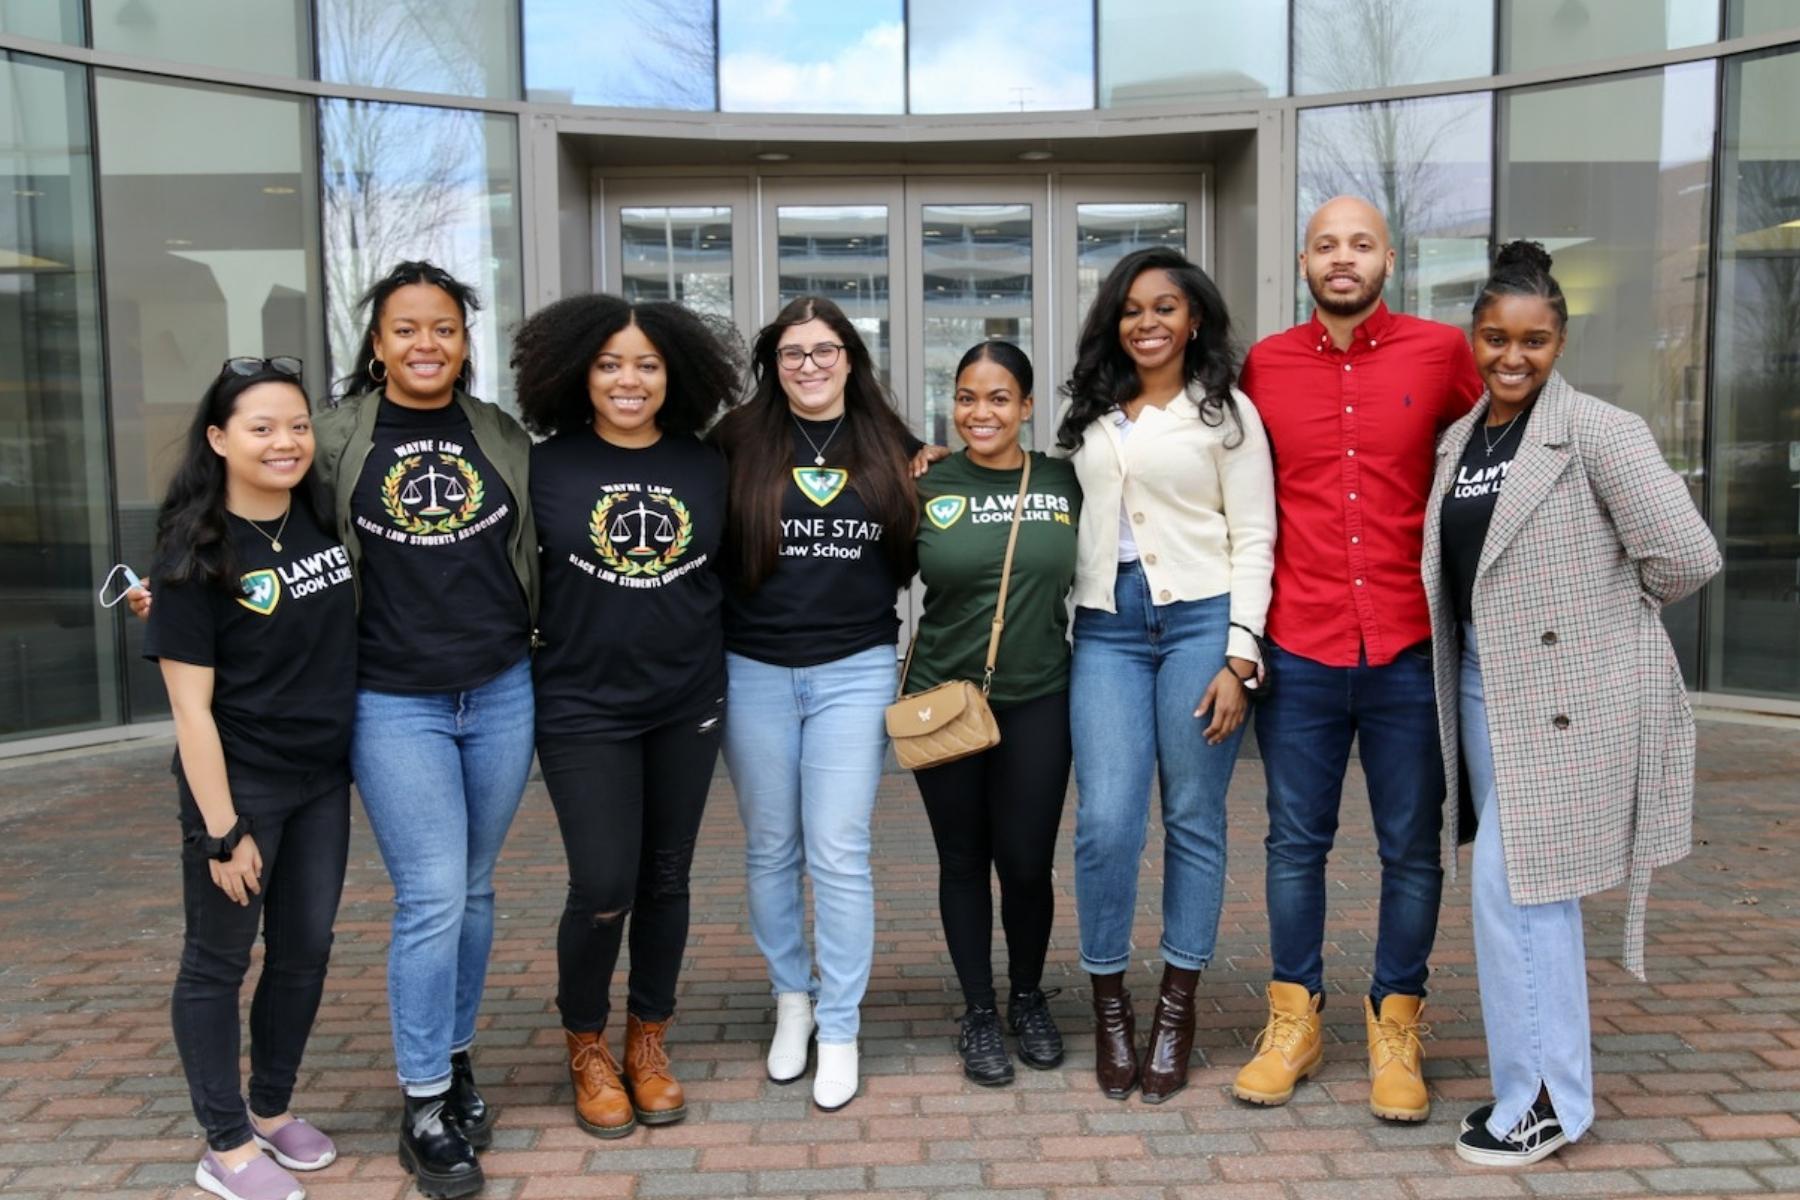 Organizers and volunteers from the Black Law Students Association pose for a photo outside Wayne State University Law School